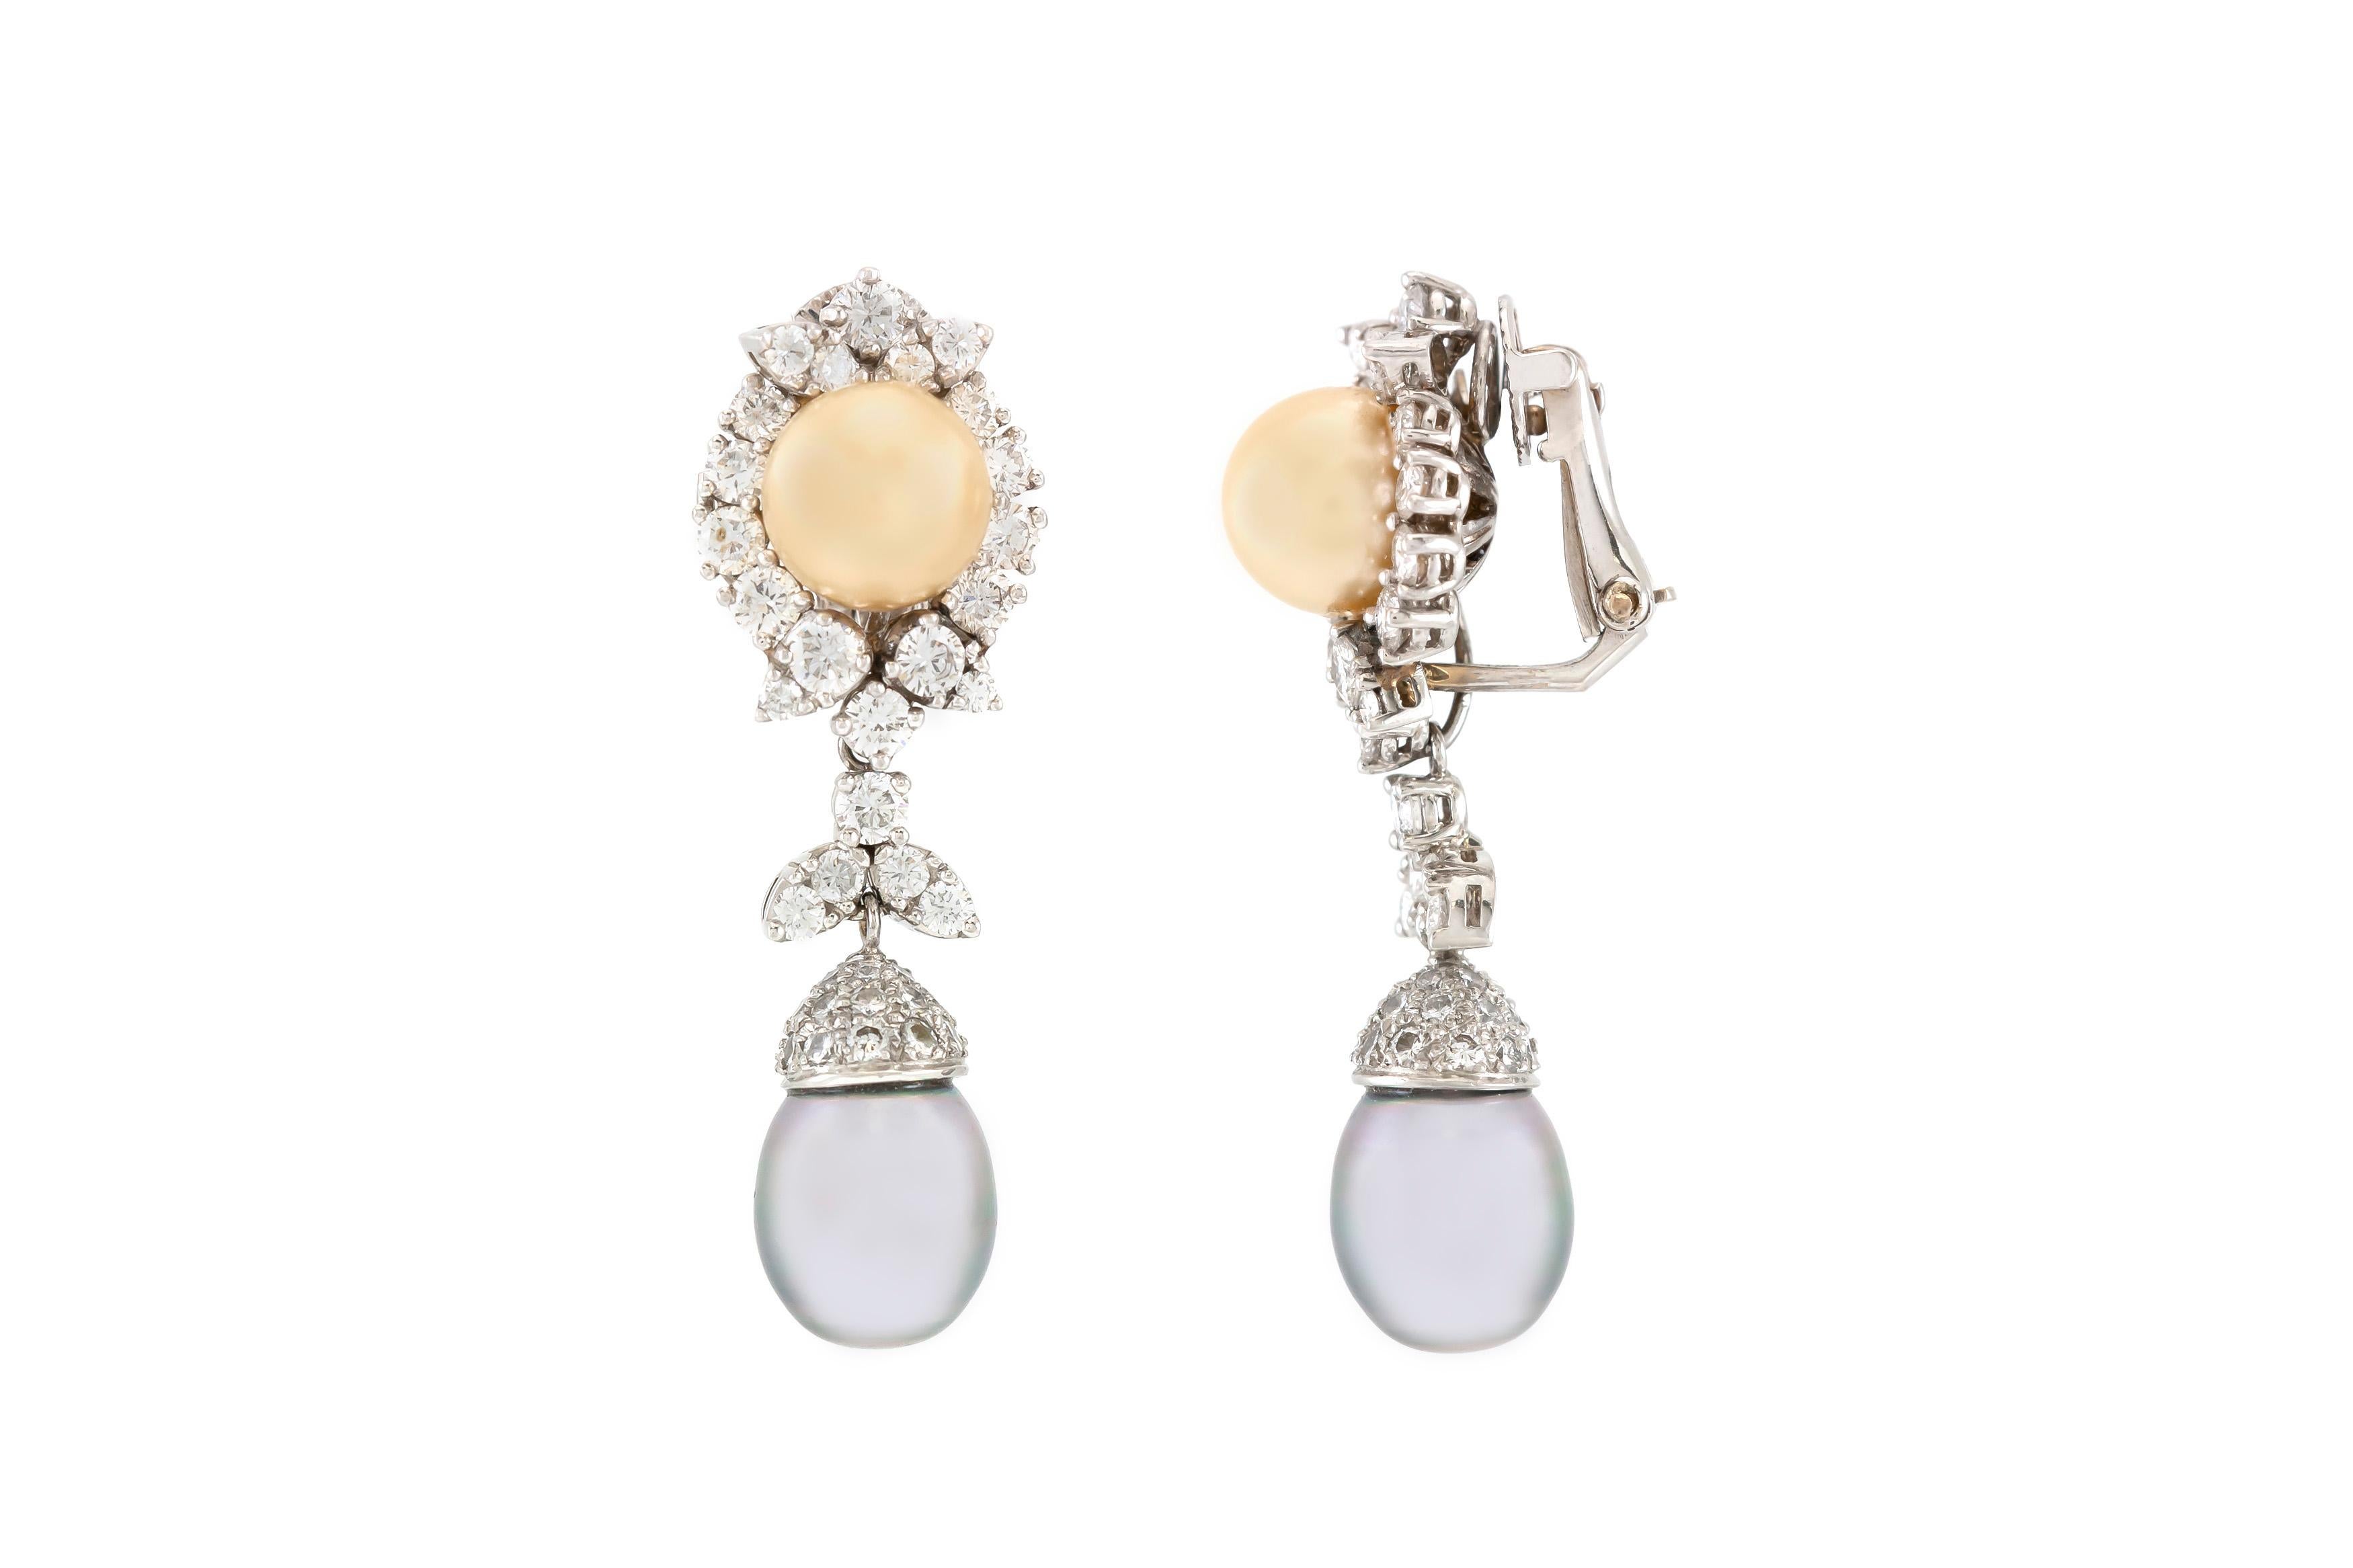 Beautiful golden and grey Tahitian pearl drop earrings are finely crafted in platinum. The diamonds weigh a total of approximately 5.36 carat.